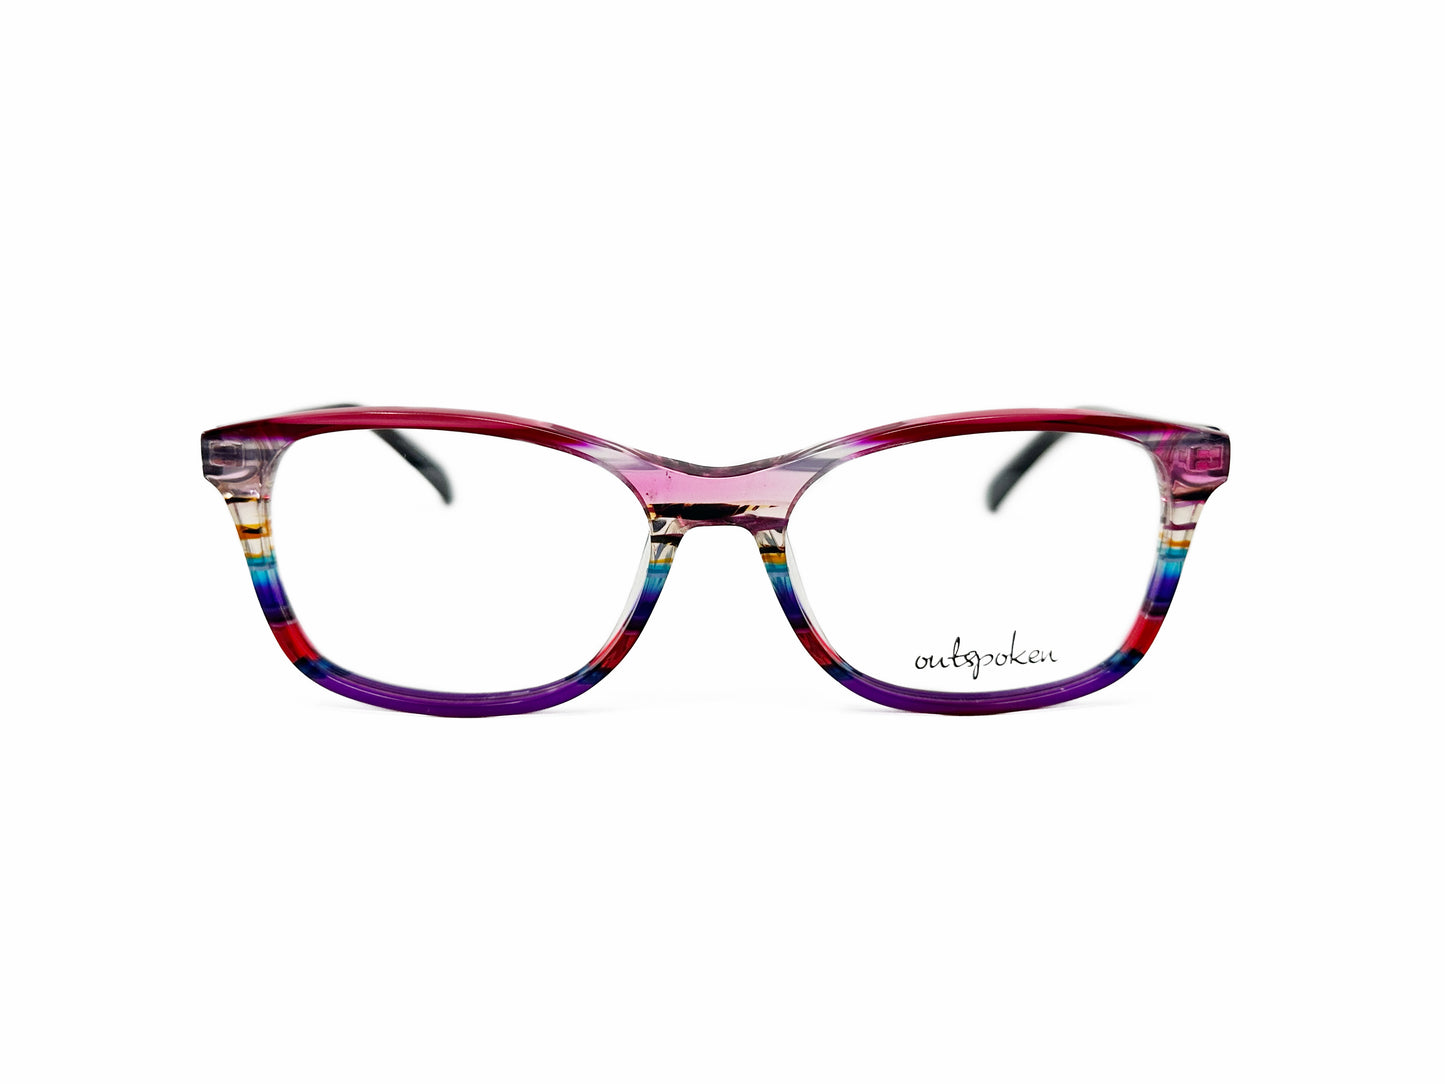 Outspoken rectangular acetate optical frame. Model: OA1519. Color: C7 - Pink, purple, blue, yellow, and transparent stripes. Front view